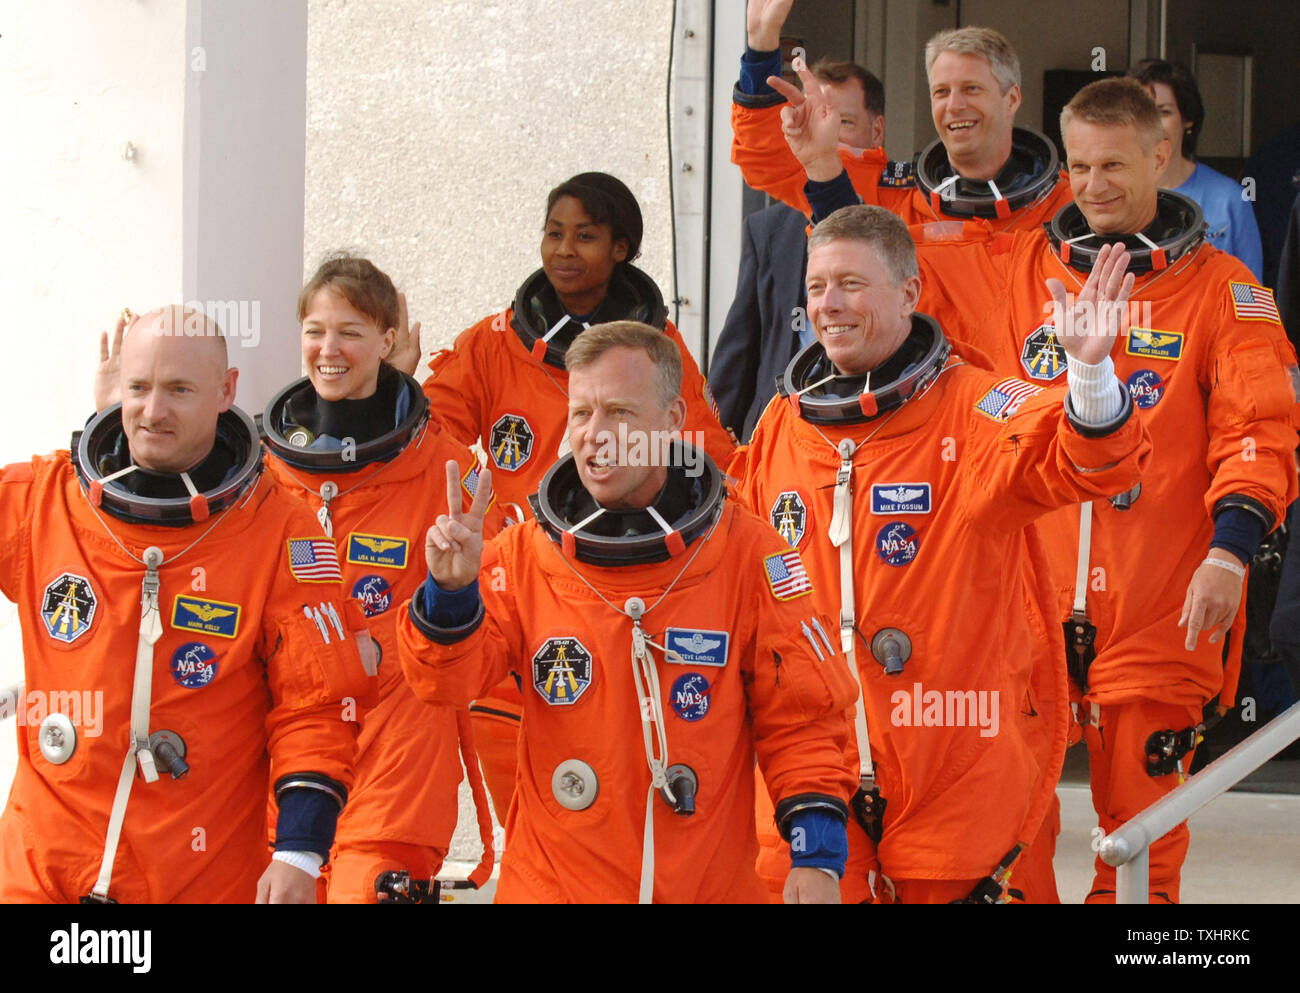 Commander Steven Lindsey (R) gives the victory sign as he walks out with Pilot Mark Kelly (L) and Mission Specialists  Lisa Nowak (2nd Row,L), Michael Fossum (2nd row,R), Stephanie Wilson (3rd Row,L), Piers Sellers(3rd Row,R), and Thomas Reiter (rear) of Germany, from the Operations and Checkout Building to board the NASA Astrovan en route to the Space Shuttle Discovery for mission STS-121 at Cape Canaveral, Florida on July 2, 2006.  (UPI Photo/Pat Benic) Stock Photo